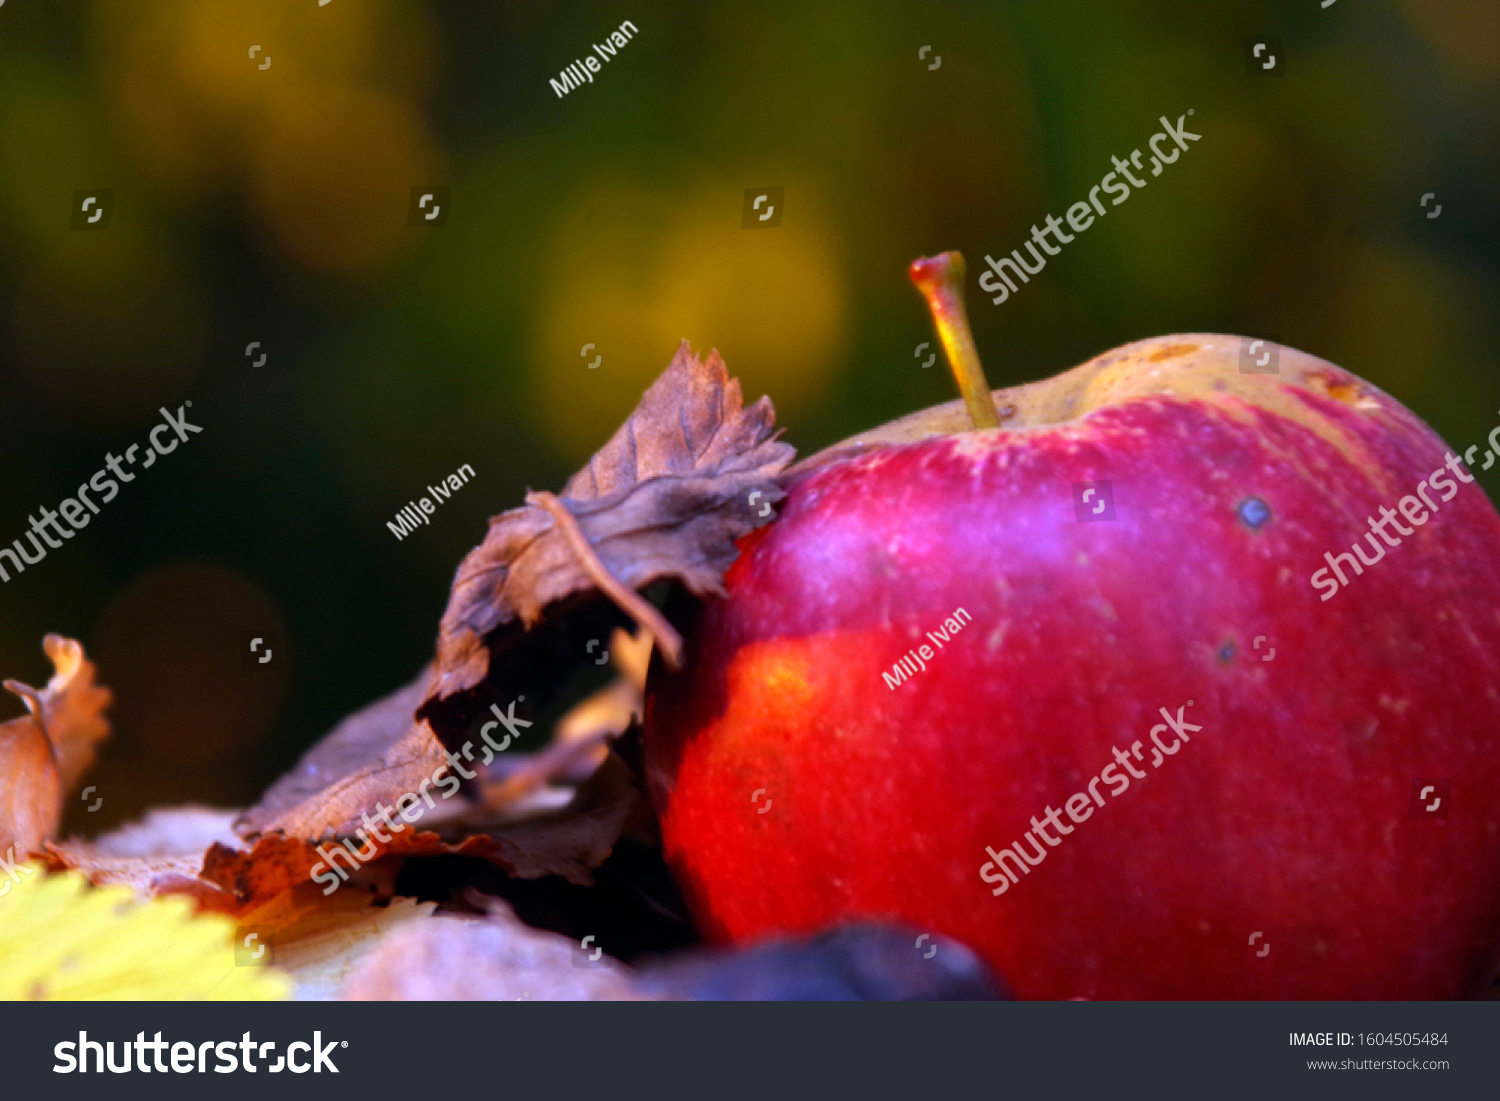 autumn organic fruits, apple with walnut in shell on the fall leaves ground #1604505484